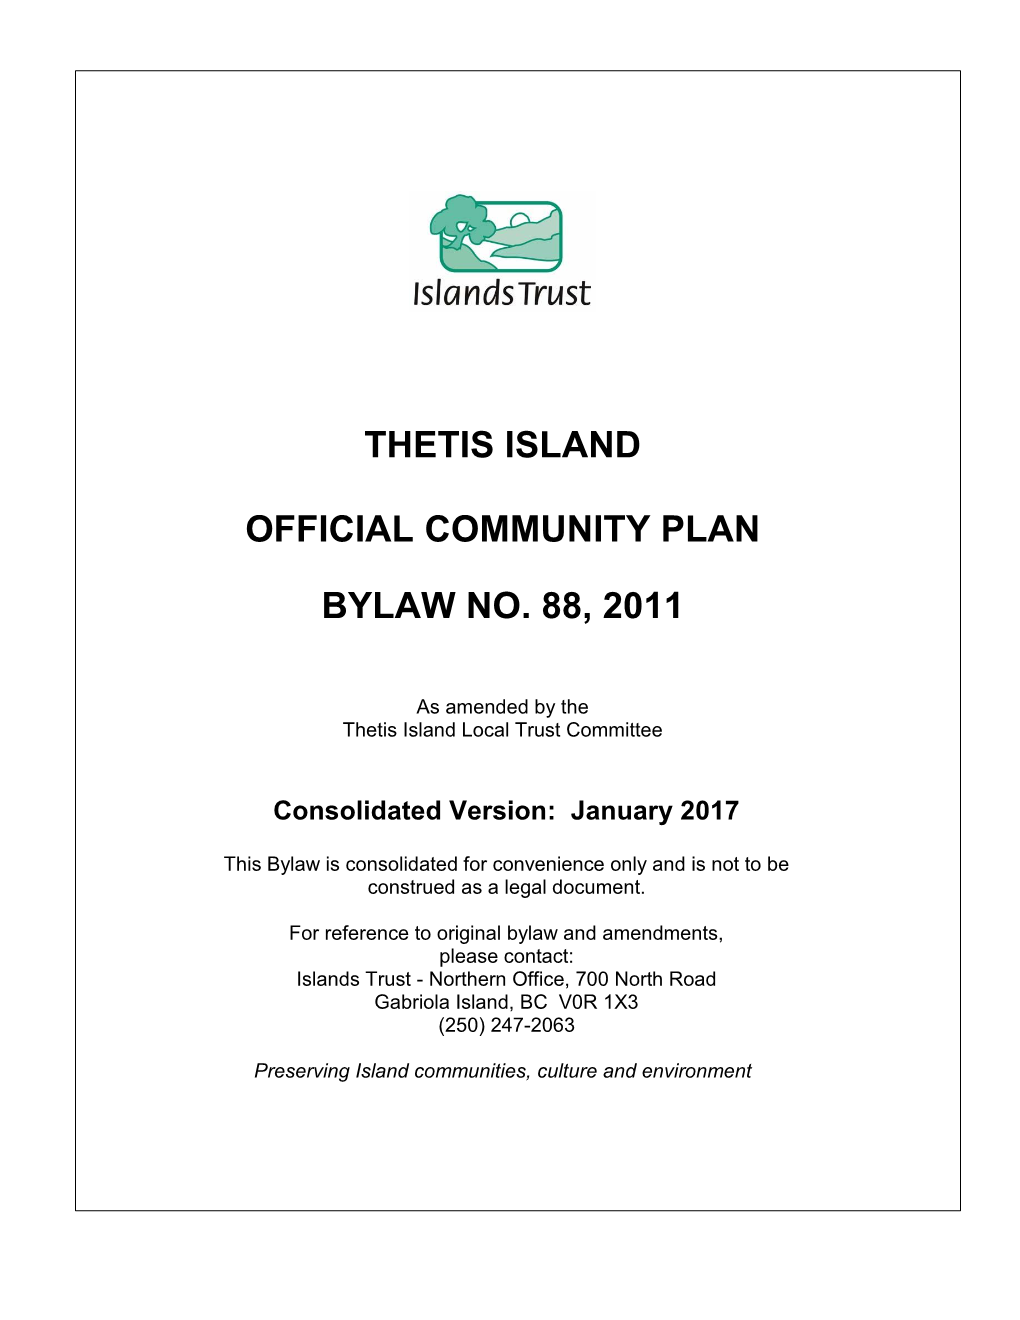 Thetis Island Official Community Plan Bylaw No. 88